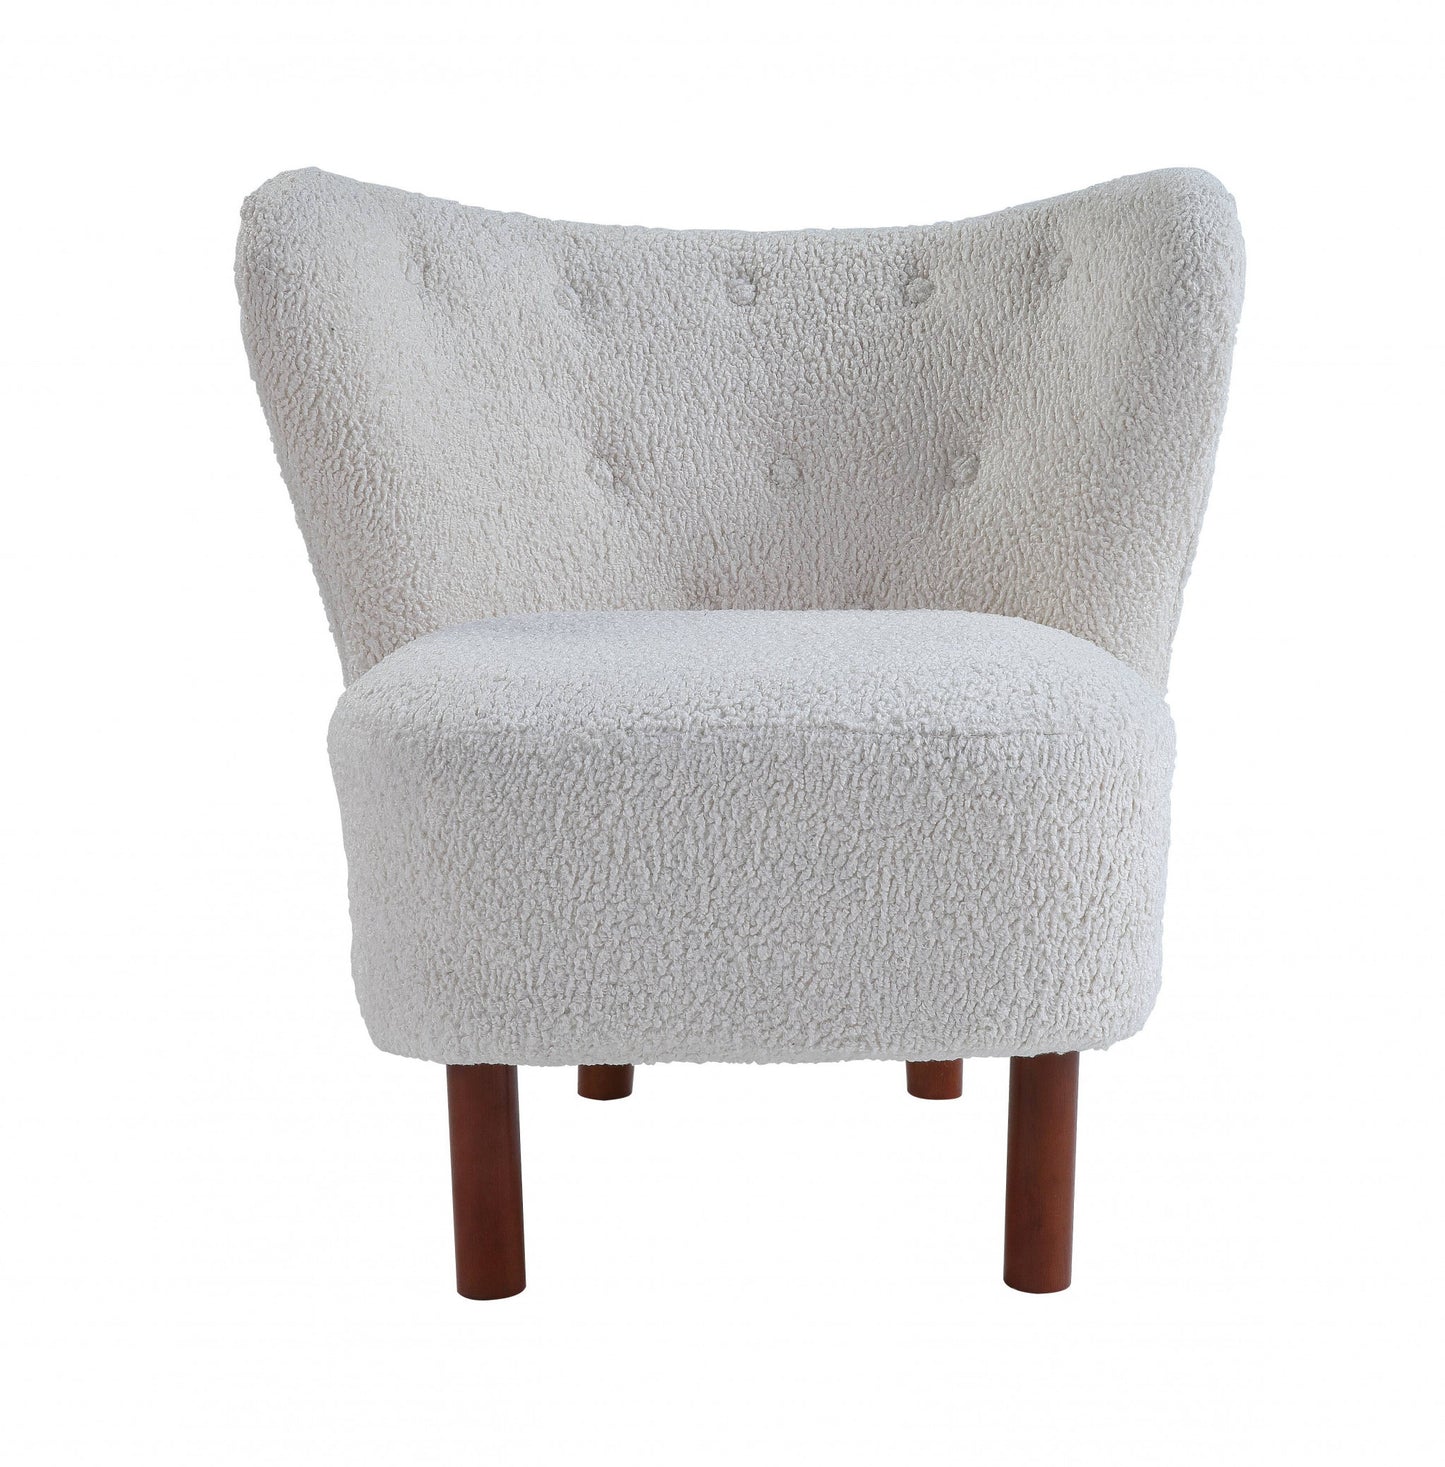 31" White Sherpa And Brown Polka Dots Wingback Chair